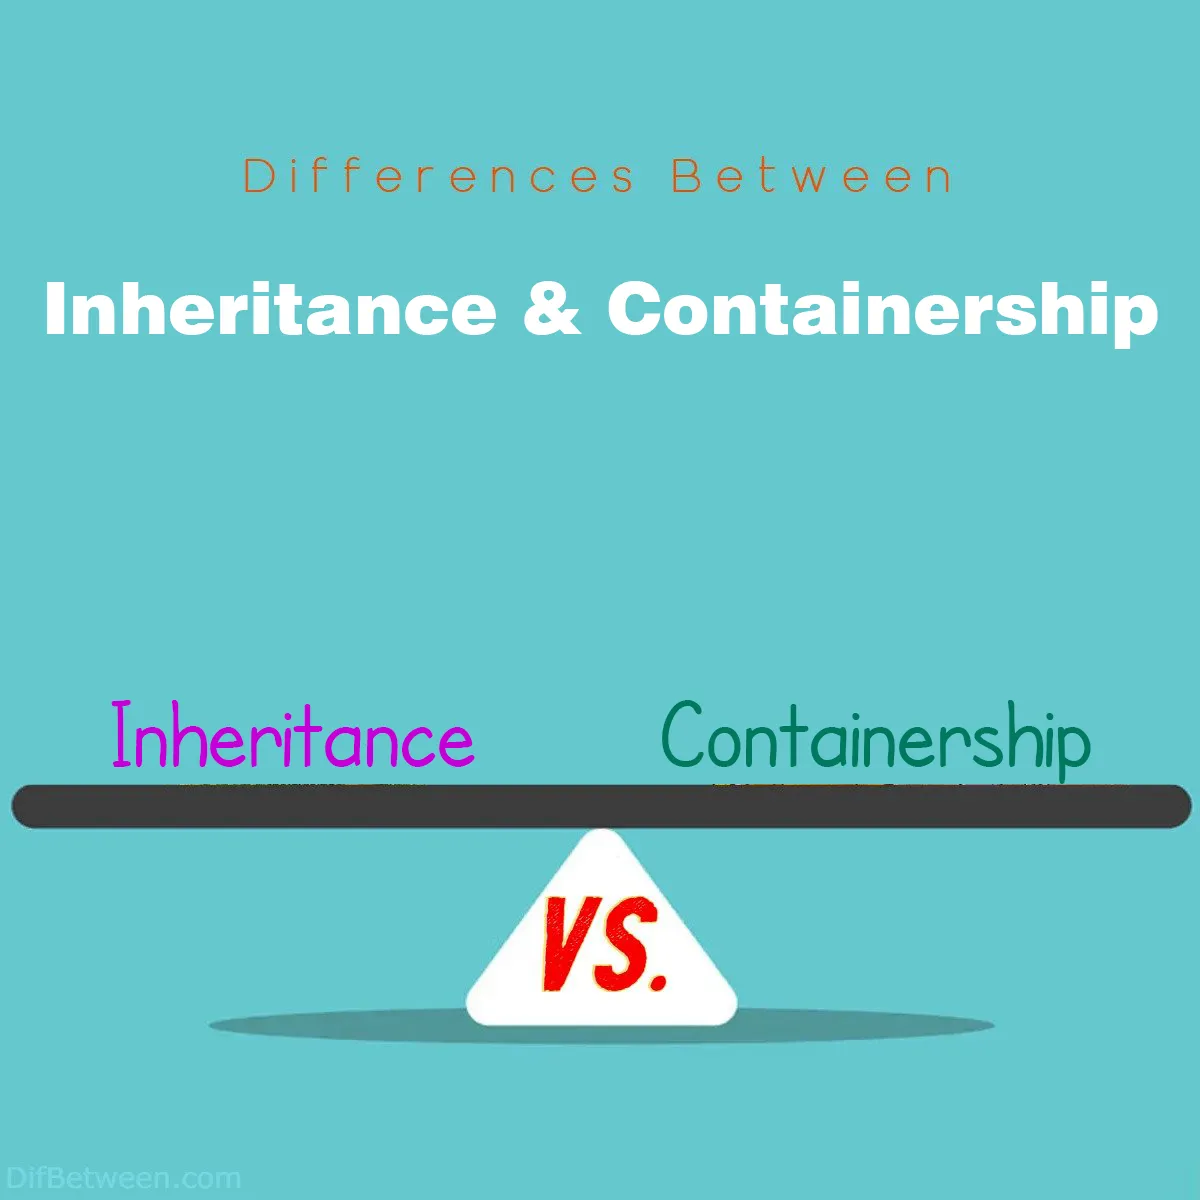 Differences Between Inheritance and Containership